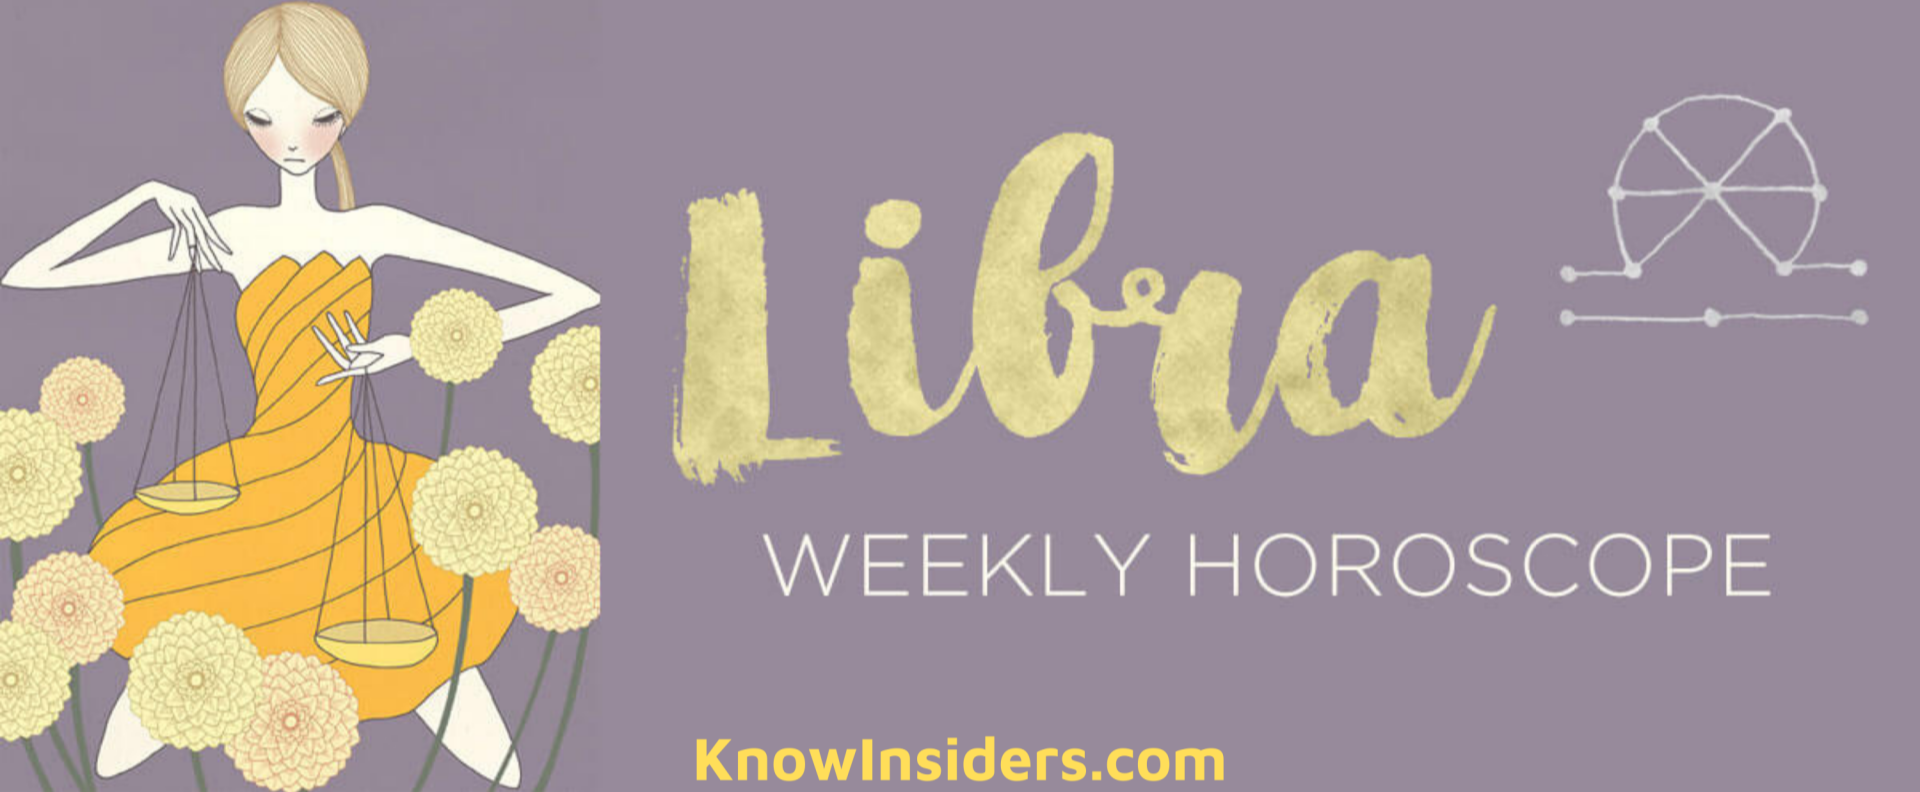 LIBRA Weekly Horoscope (April 12 - 18): Astrological Predictions for Love, Financial, Career and Health